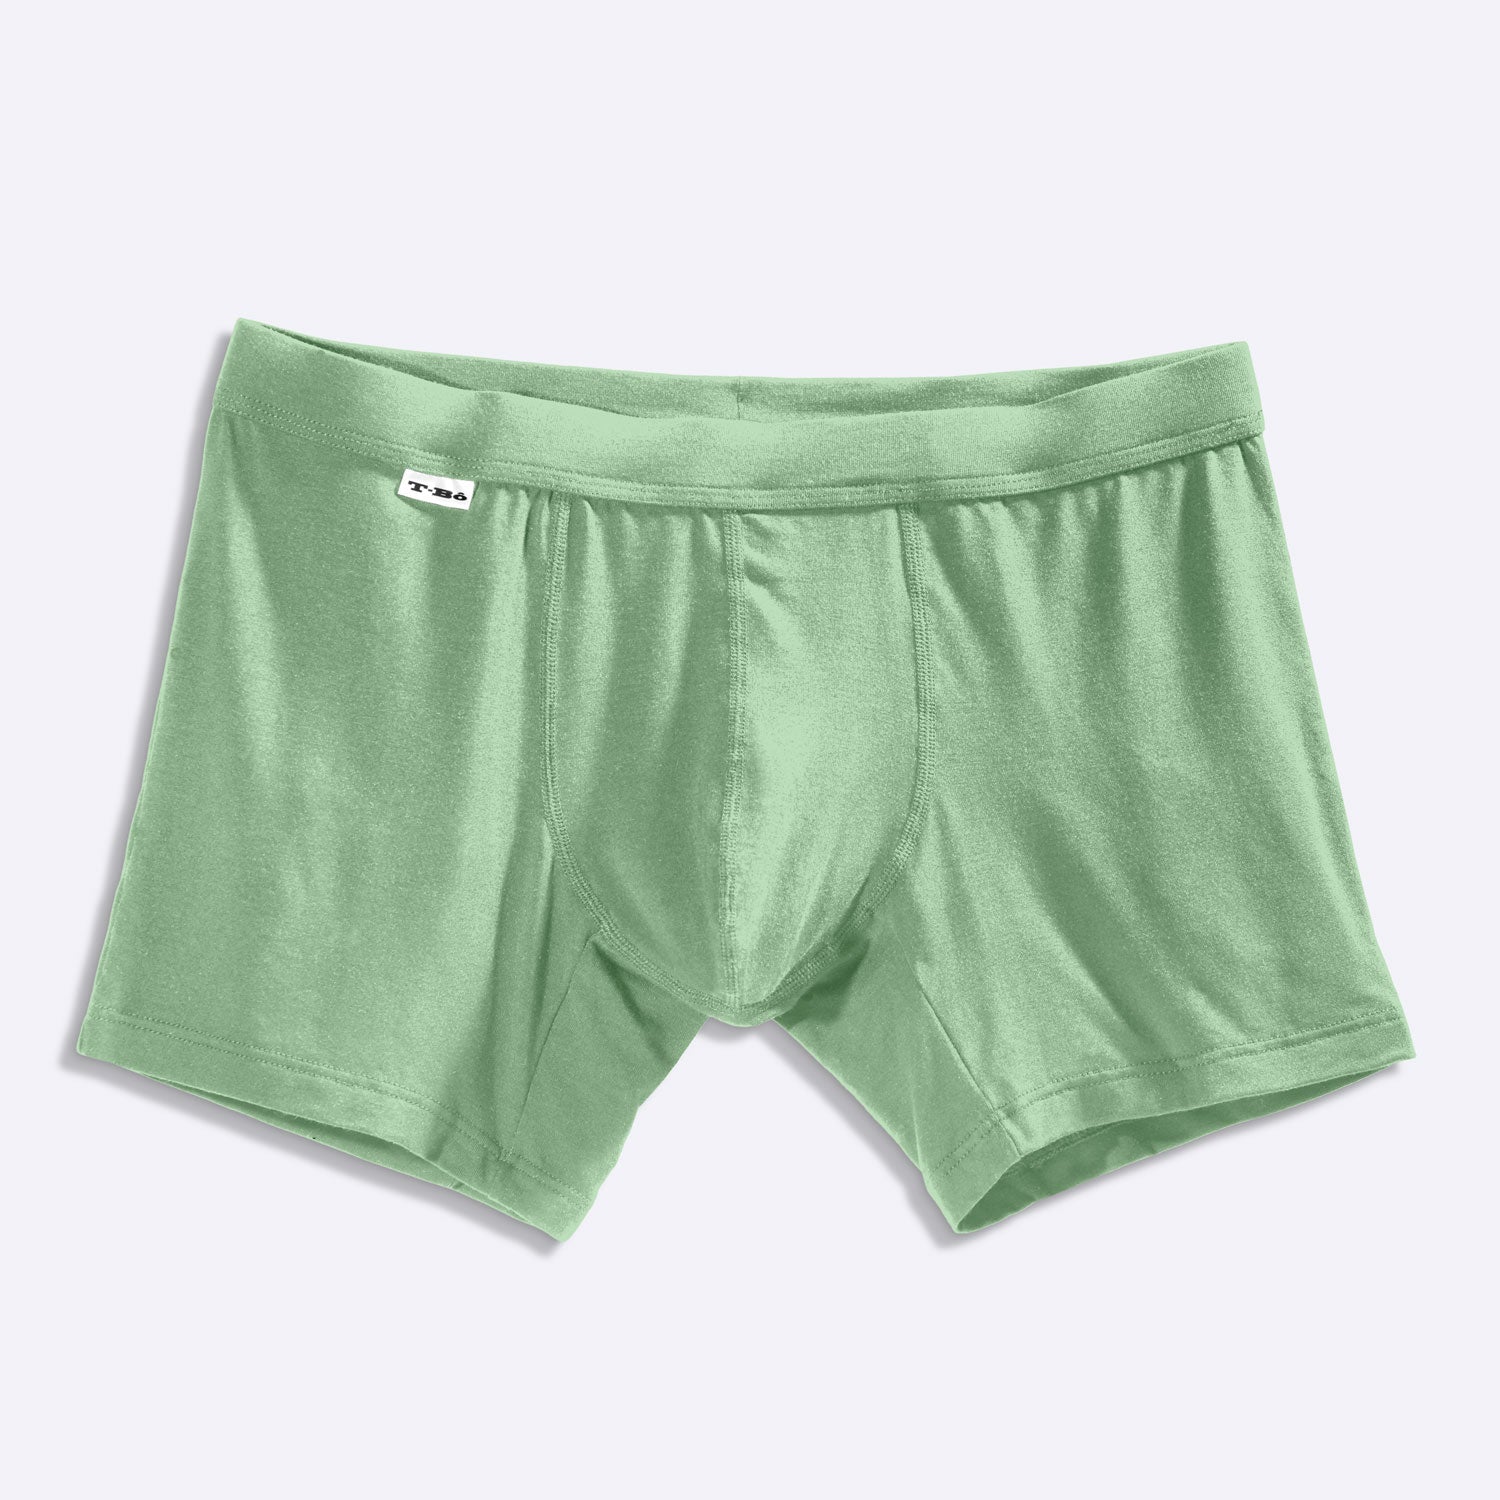 The Limited Edition Mint Green Boxer Brief for men in the USA and Canada